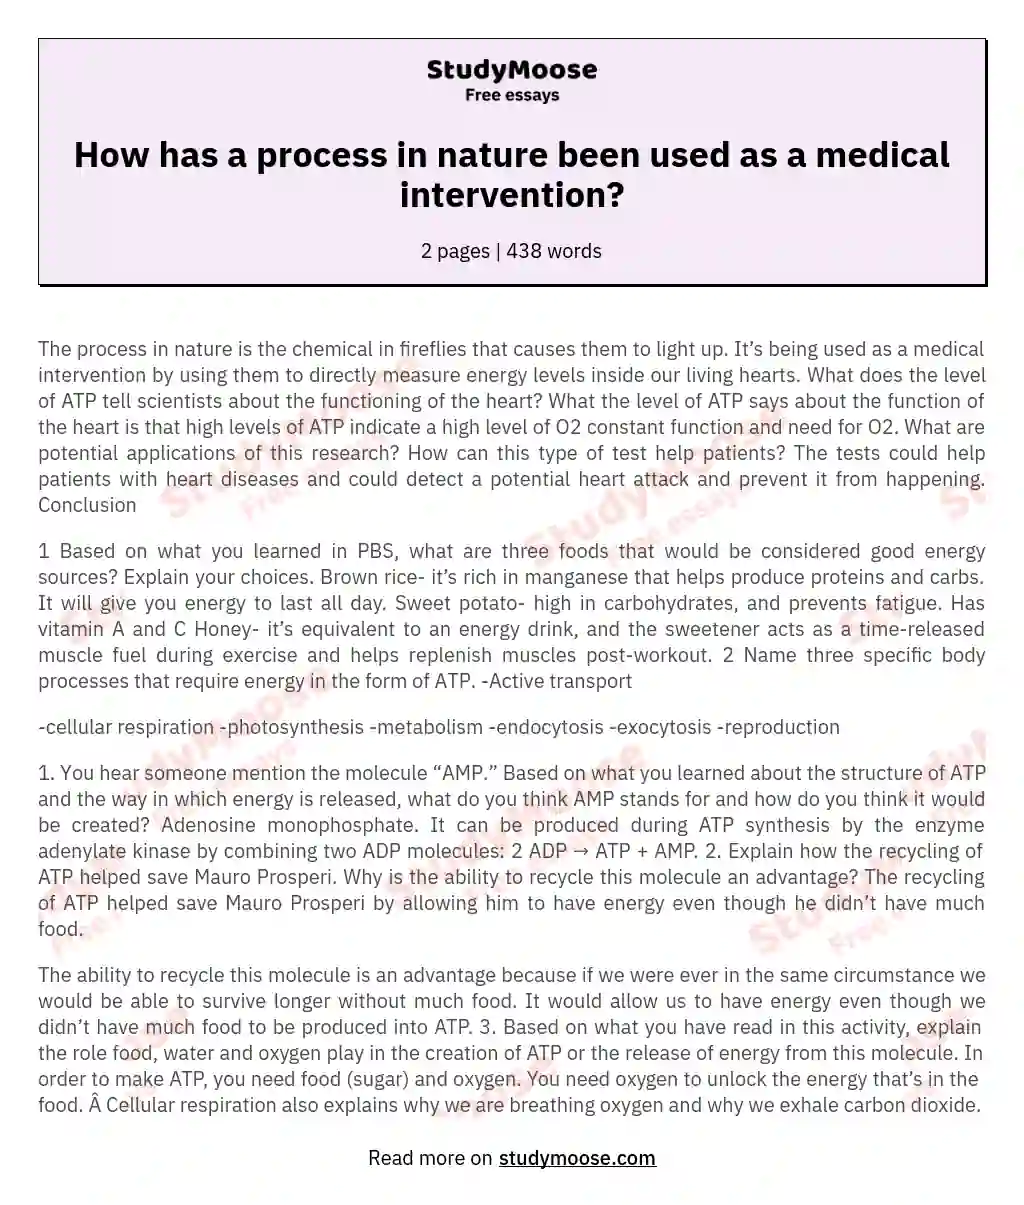 How has a process in nature been used as a medical intervention? essay